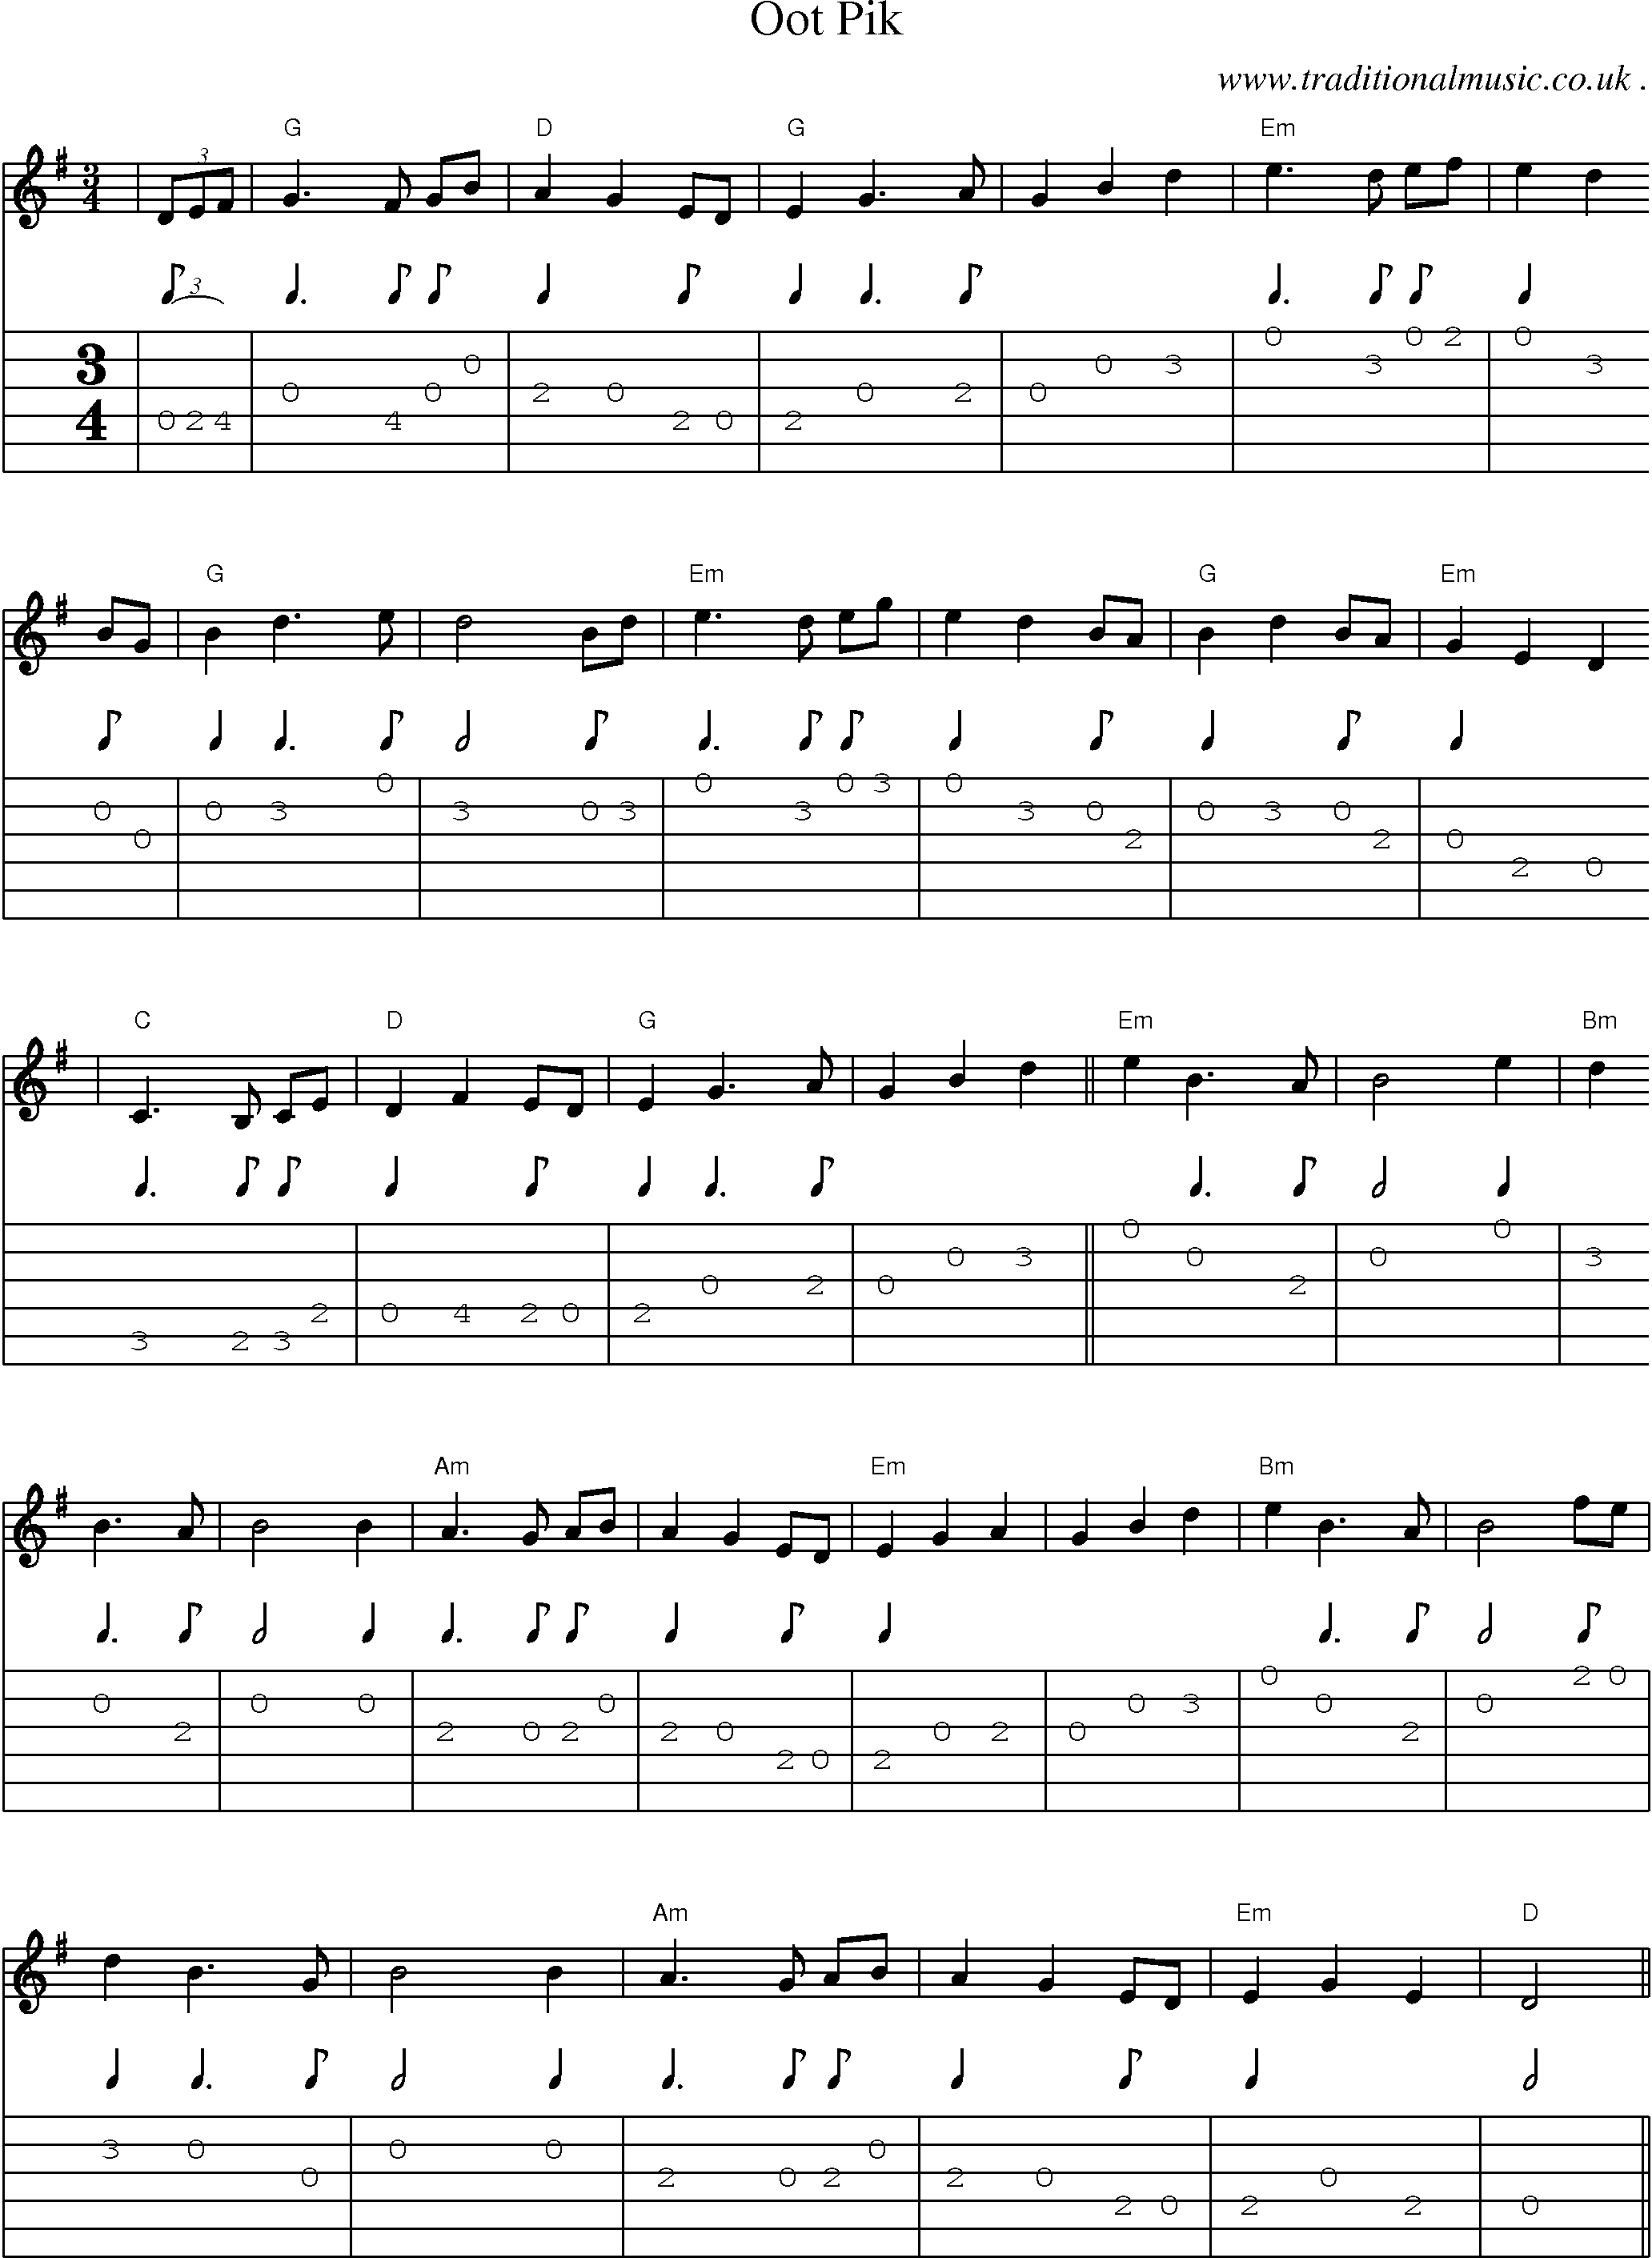 Music Score and Guitar Tabs for Oot Pik